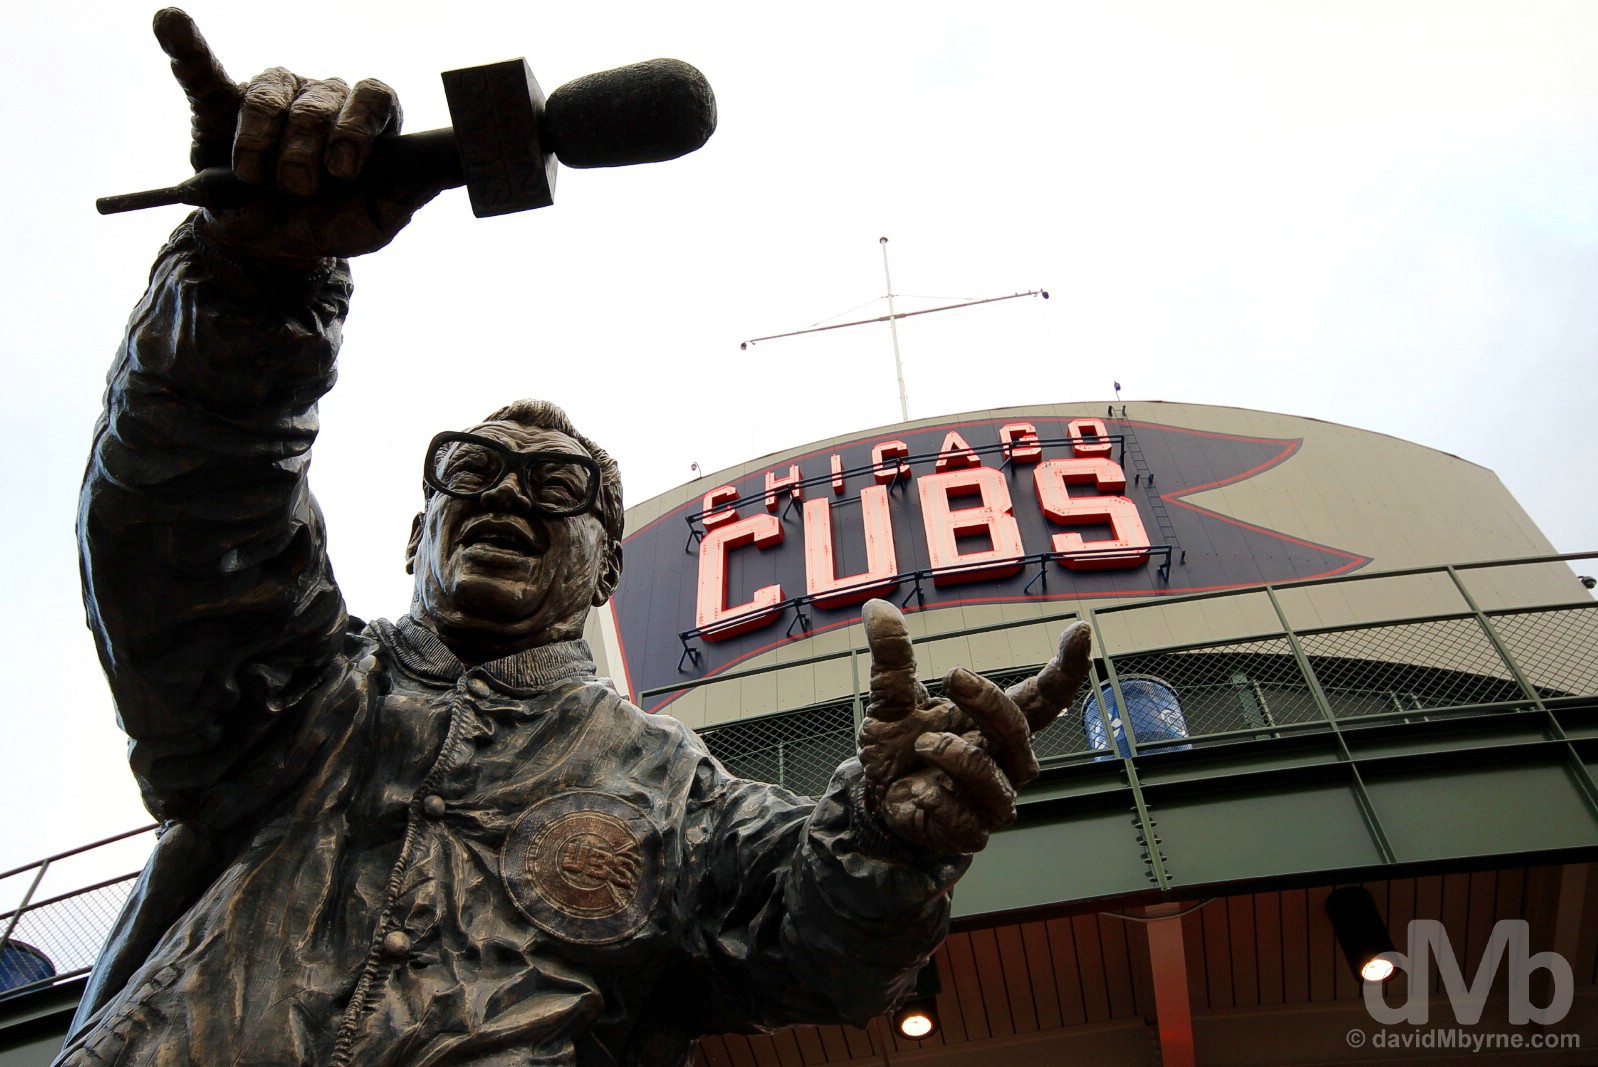 The Harry Caray statue outside Wrigley Field, Wrigleyville, Chicago, Illinois, USA. September 29, 2016.